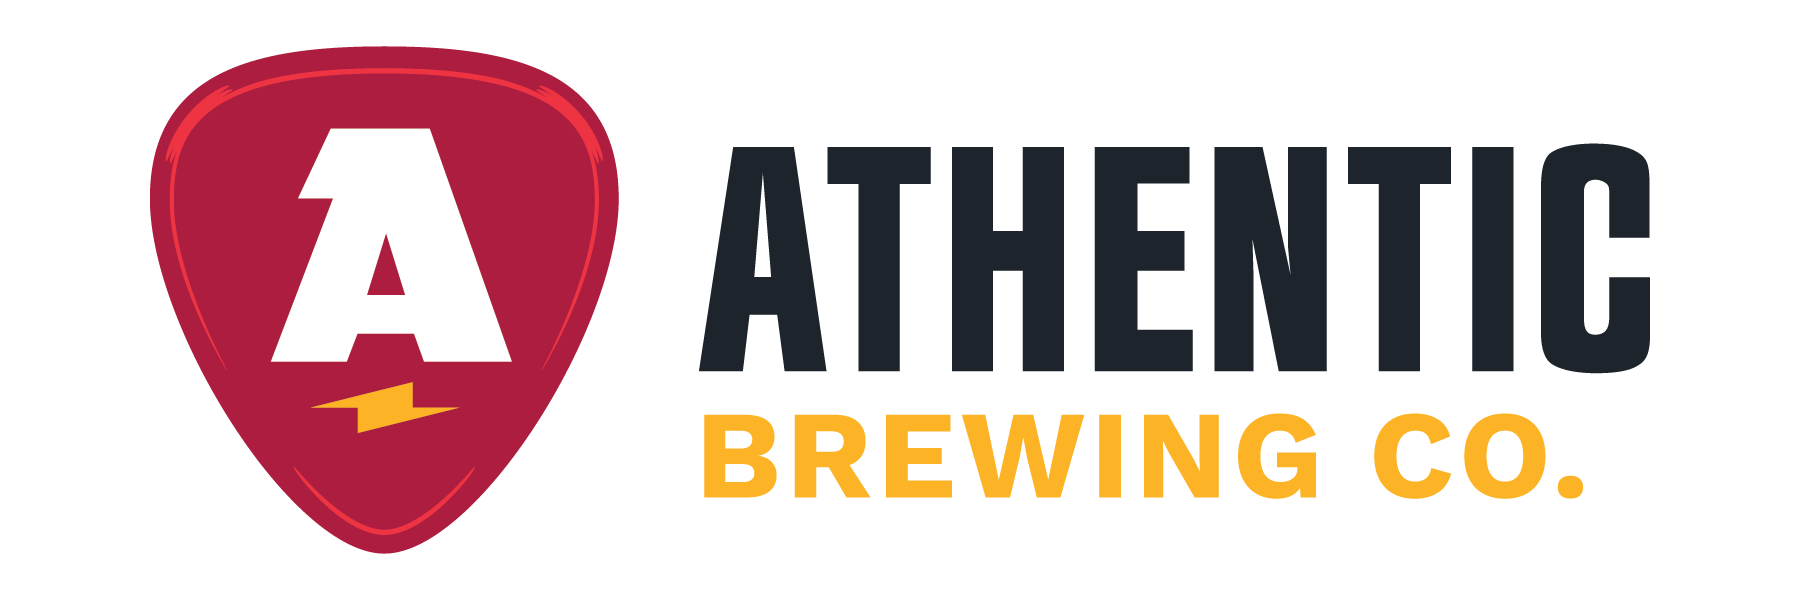 Athentic Brewing Company